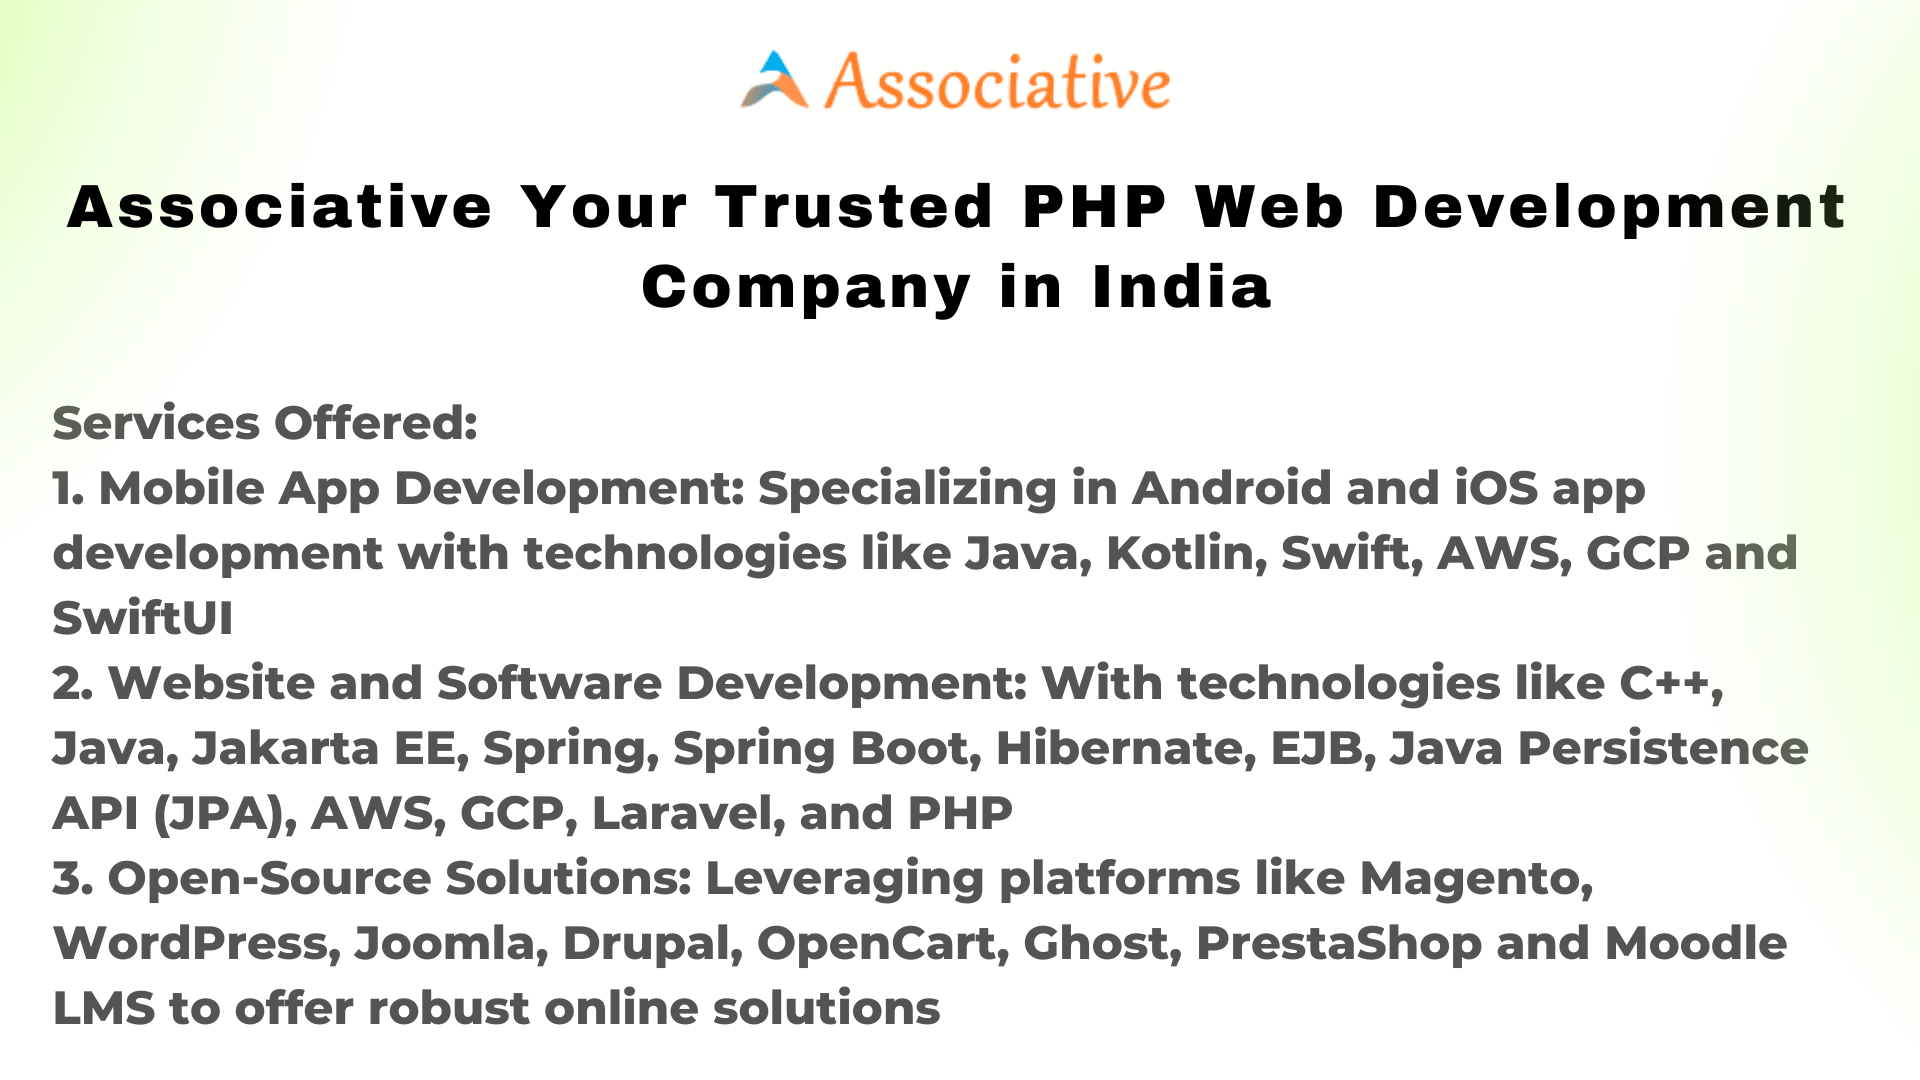 Associative Your Trusted PHP Web Development Company in India